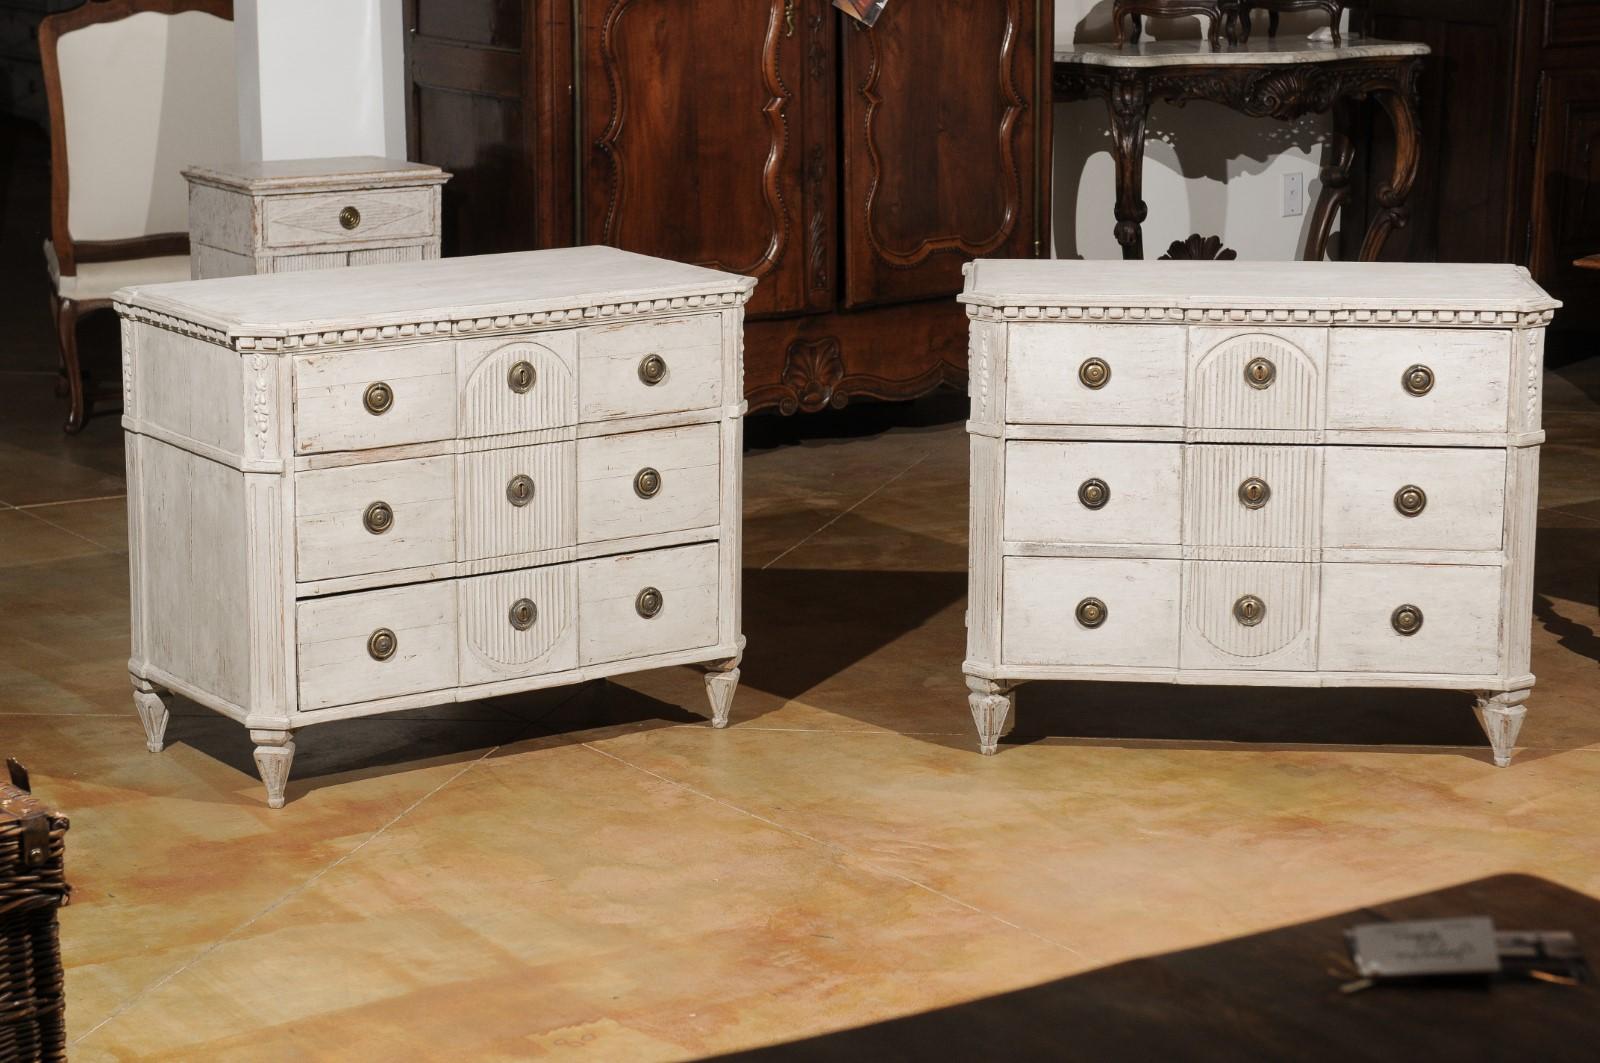 A pair of Swedish Gustavian style painted wood chests from the 20th century, with dentil molding, reeded accents and canted posts. Born in Sweden during the 20th century, each of this pair of painted chests features a rectangular top with canted